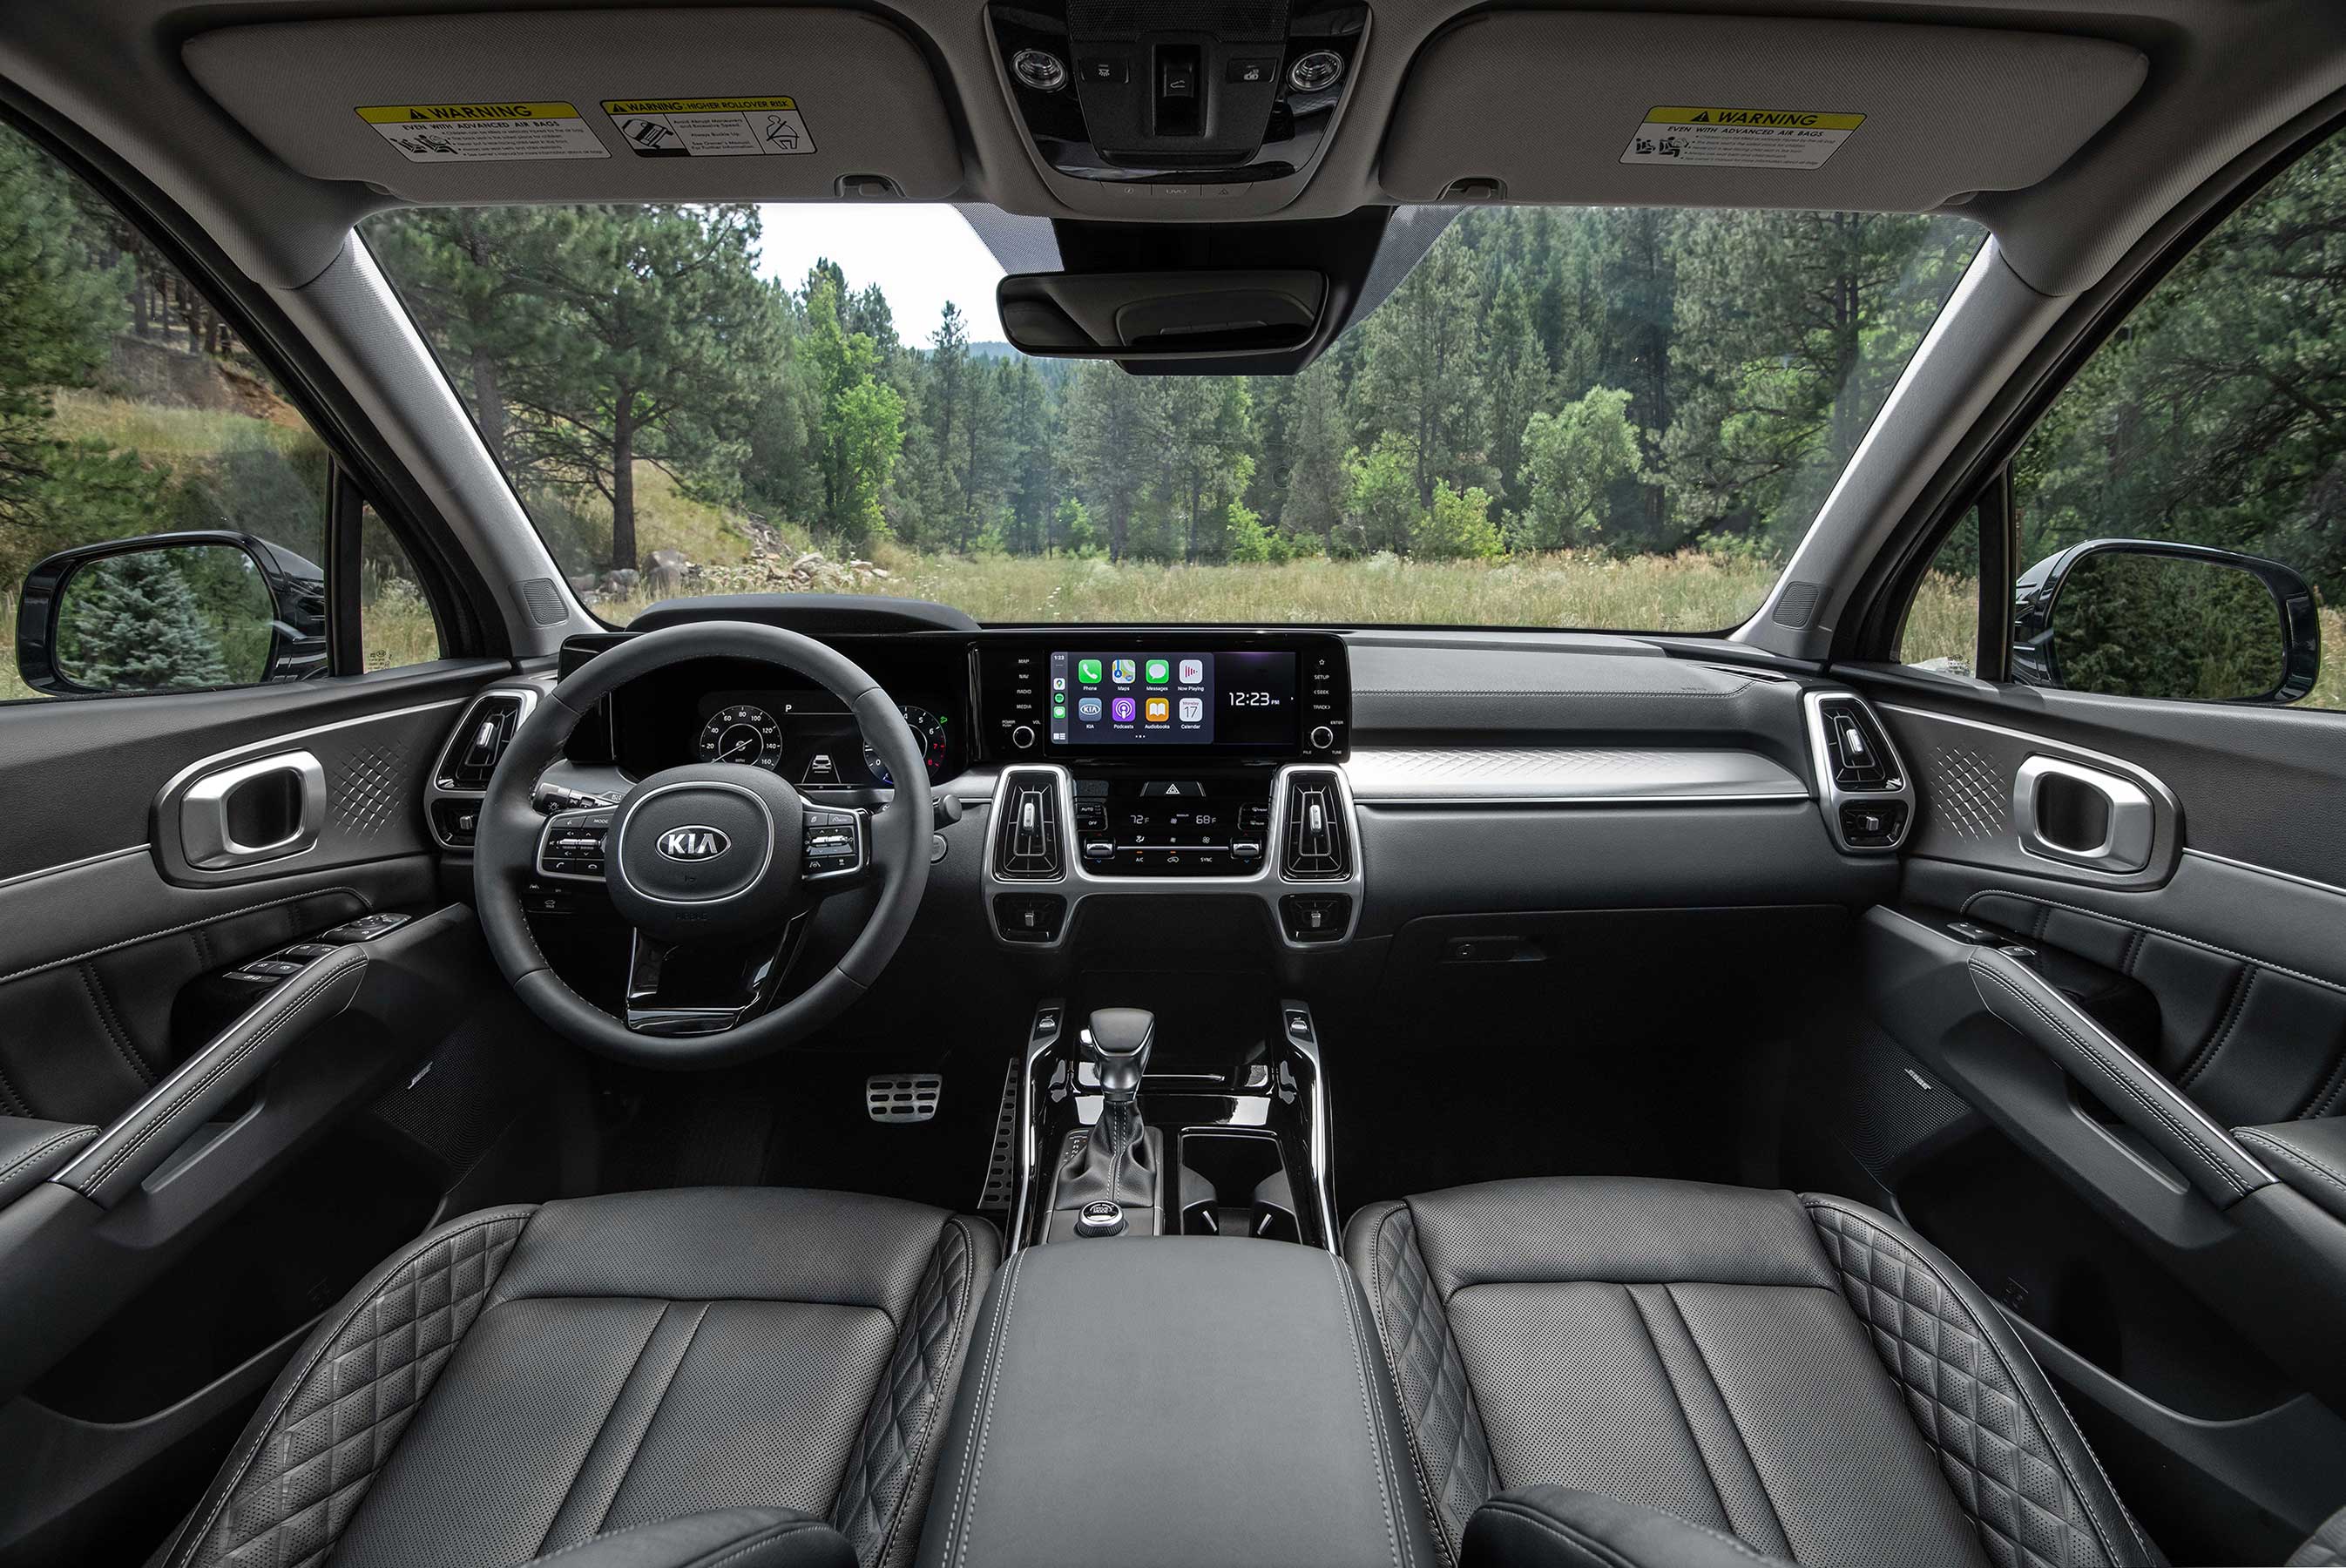 All-new 2021 Kia Sorento delivers best-in-class front/rear legroom and overall interior passenger volume.